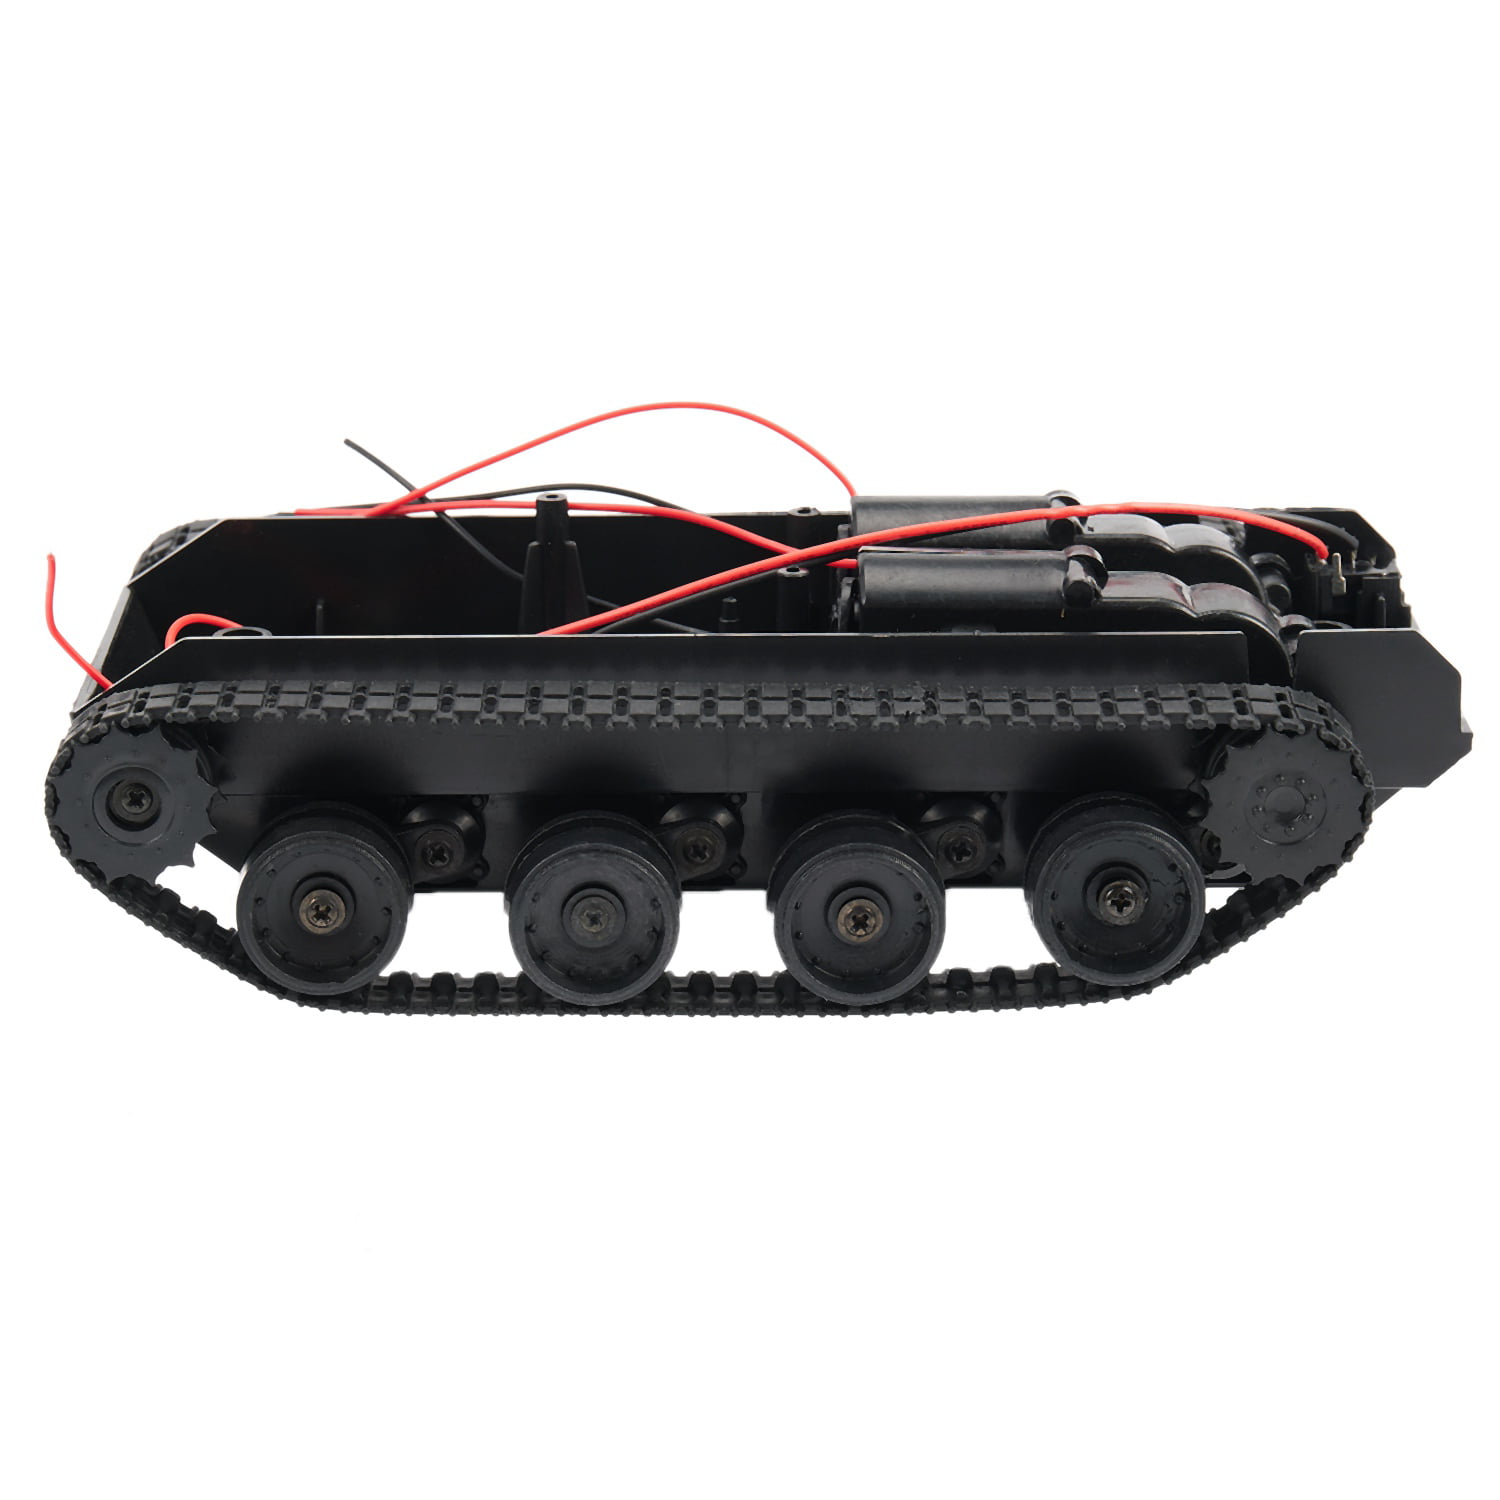 Smart Robot Tank Car Chassis Kit Rubber Track Crawler For Arduino 130 Motor❤ 